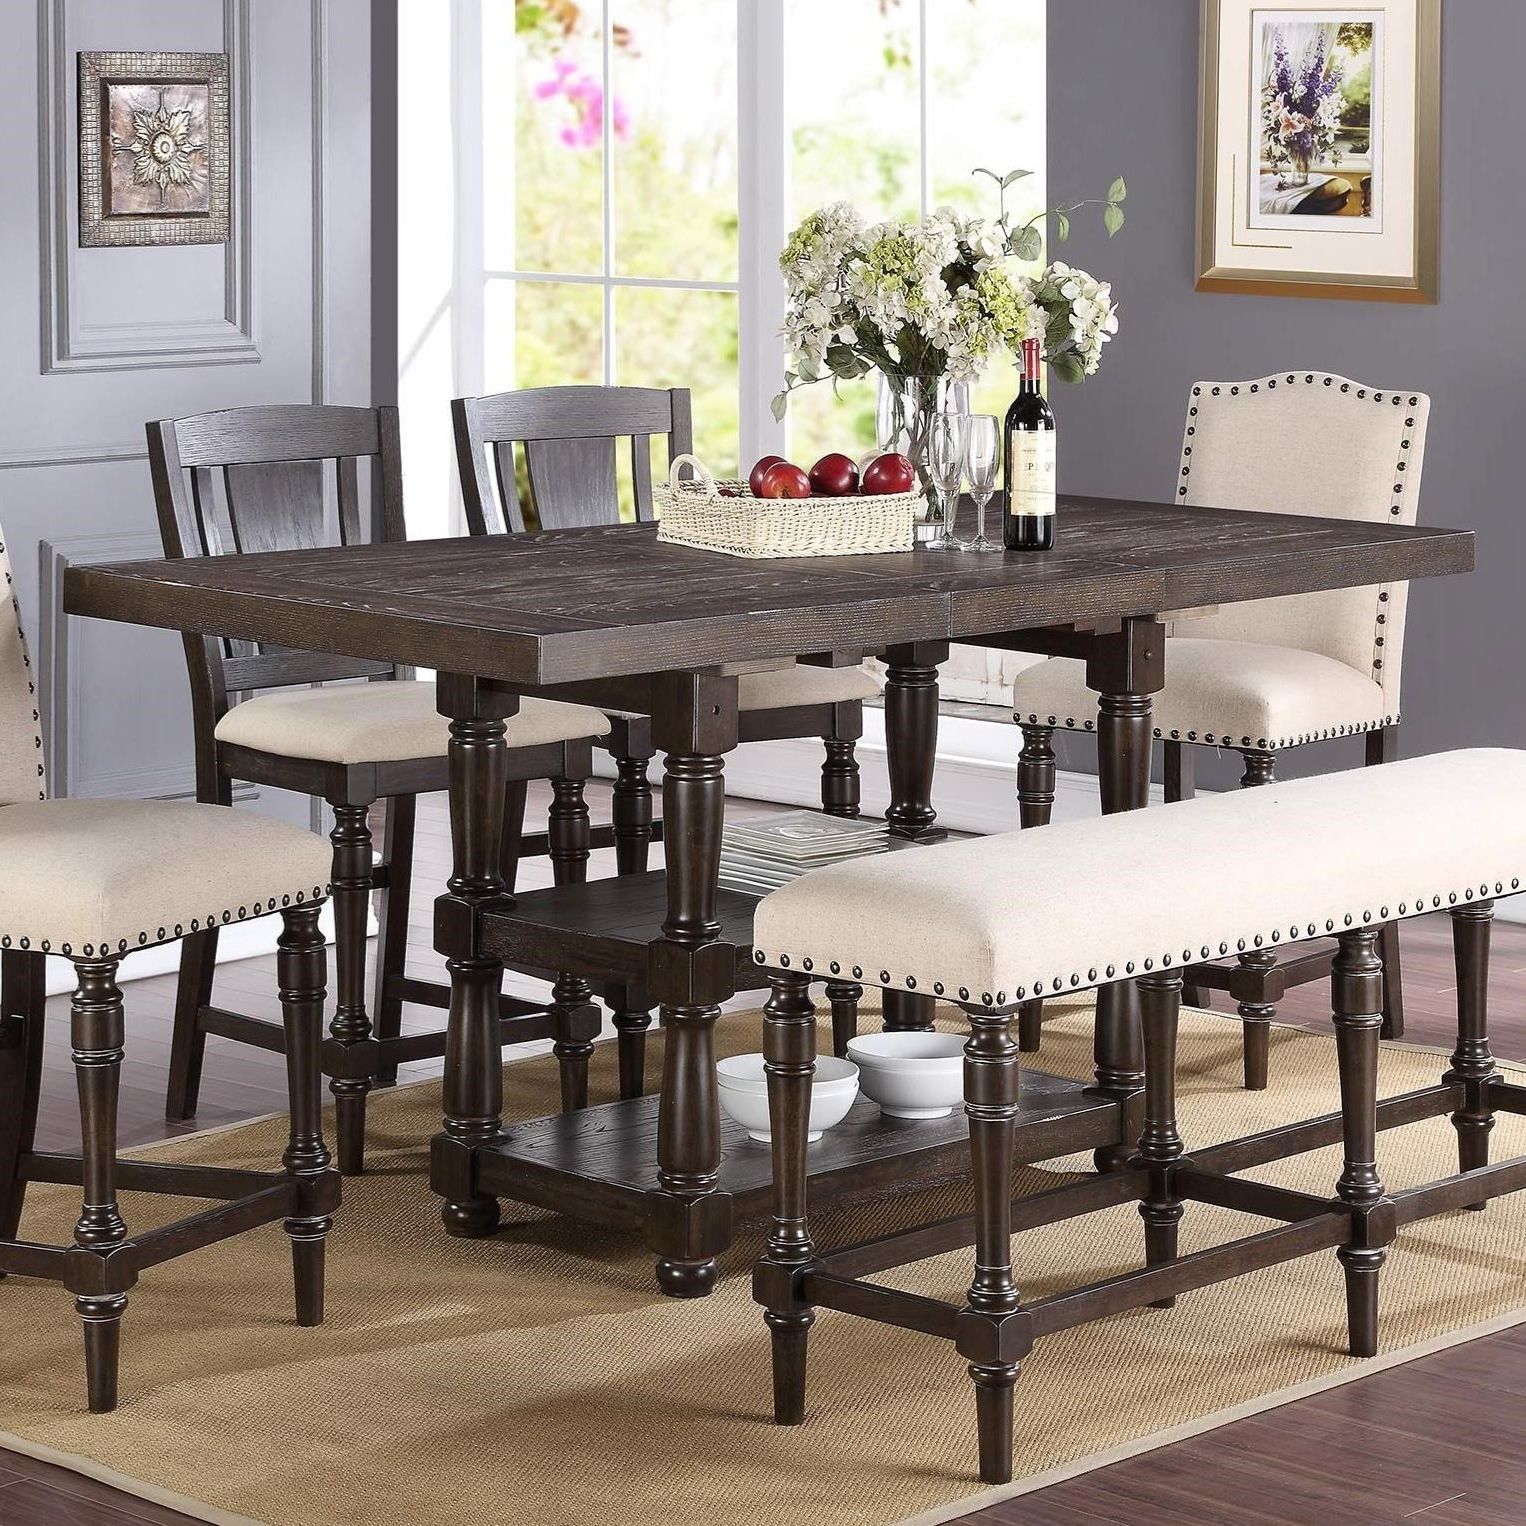 Mciver Counter Height Dining Tables Pertaining To Well Known Winners Only Xcalibur Dxt13678x Counter Height Tall Table (View 3 of 20)